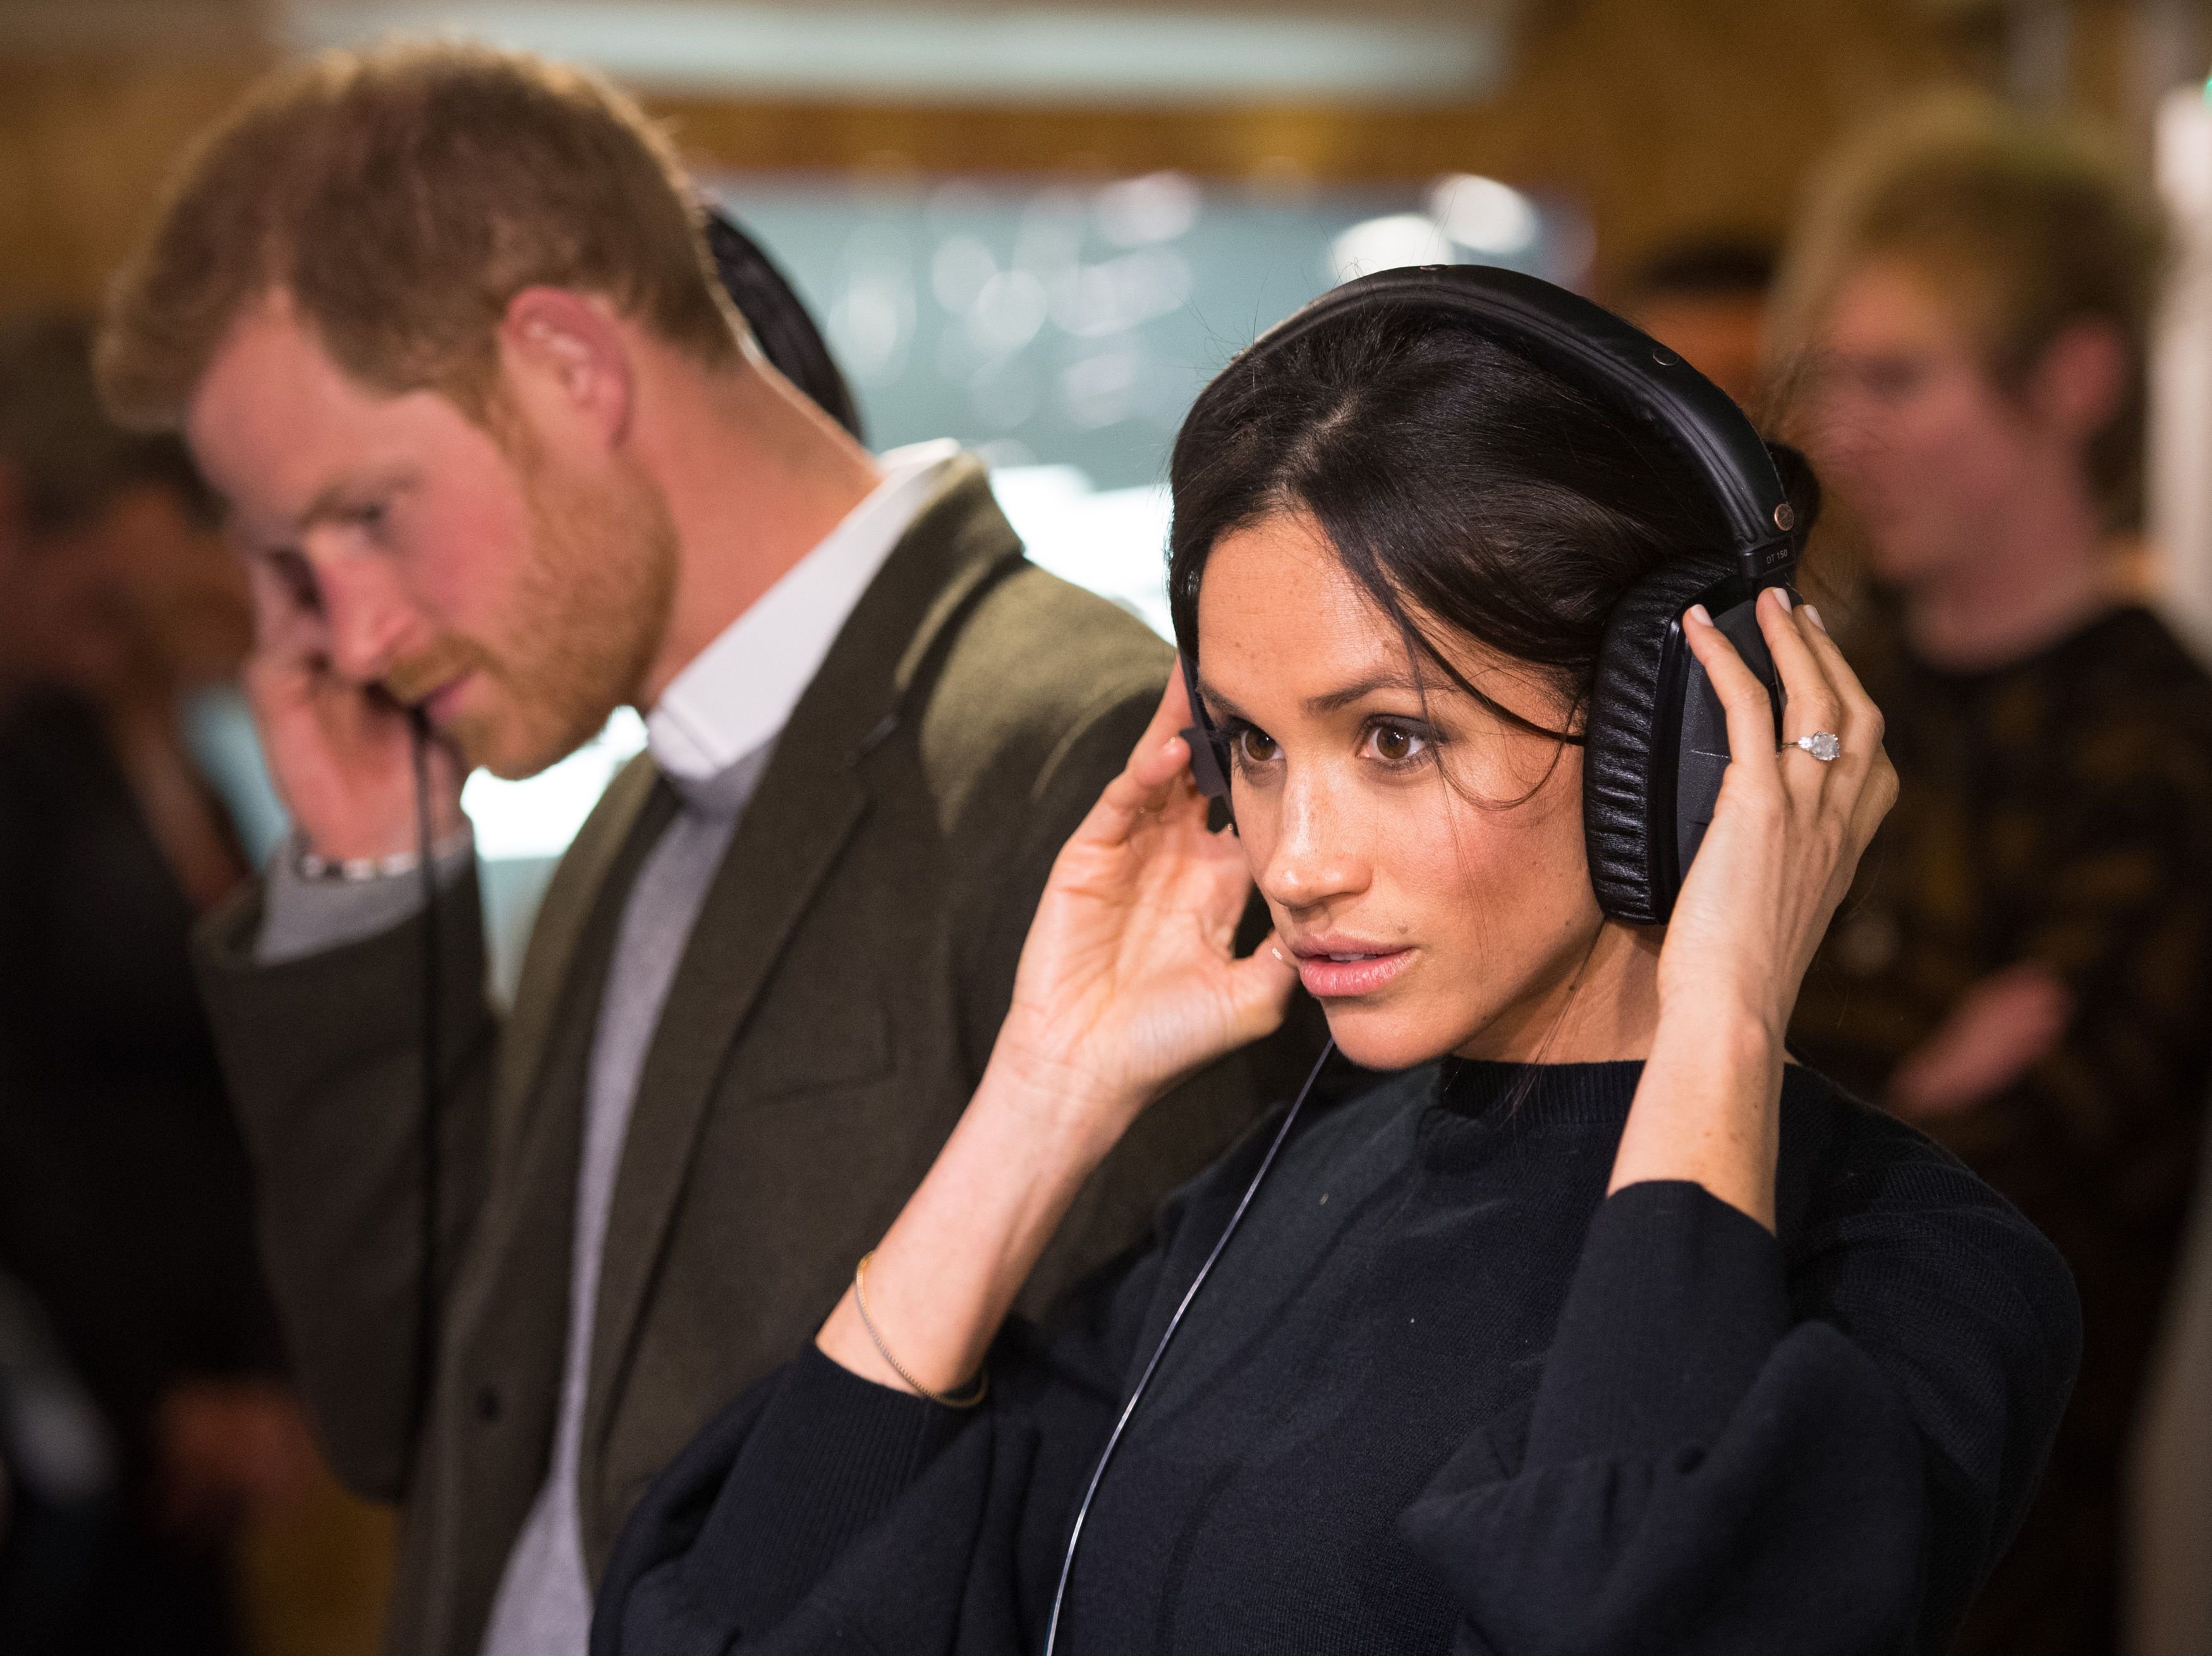  Prince Harry and Meghan Markle listen to a broadcast at Reprezent 107.3FM in Pop Brixton on January 9, 2018 